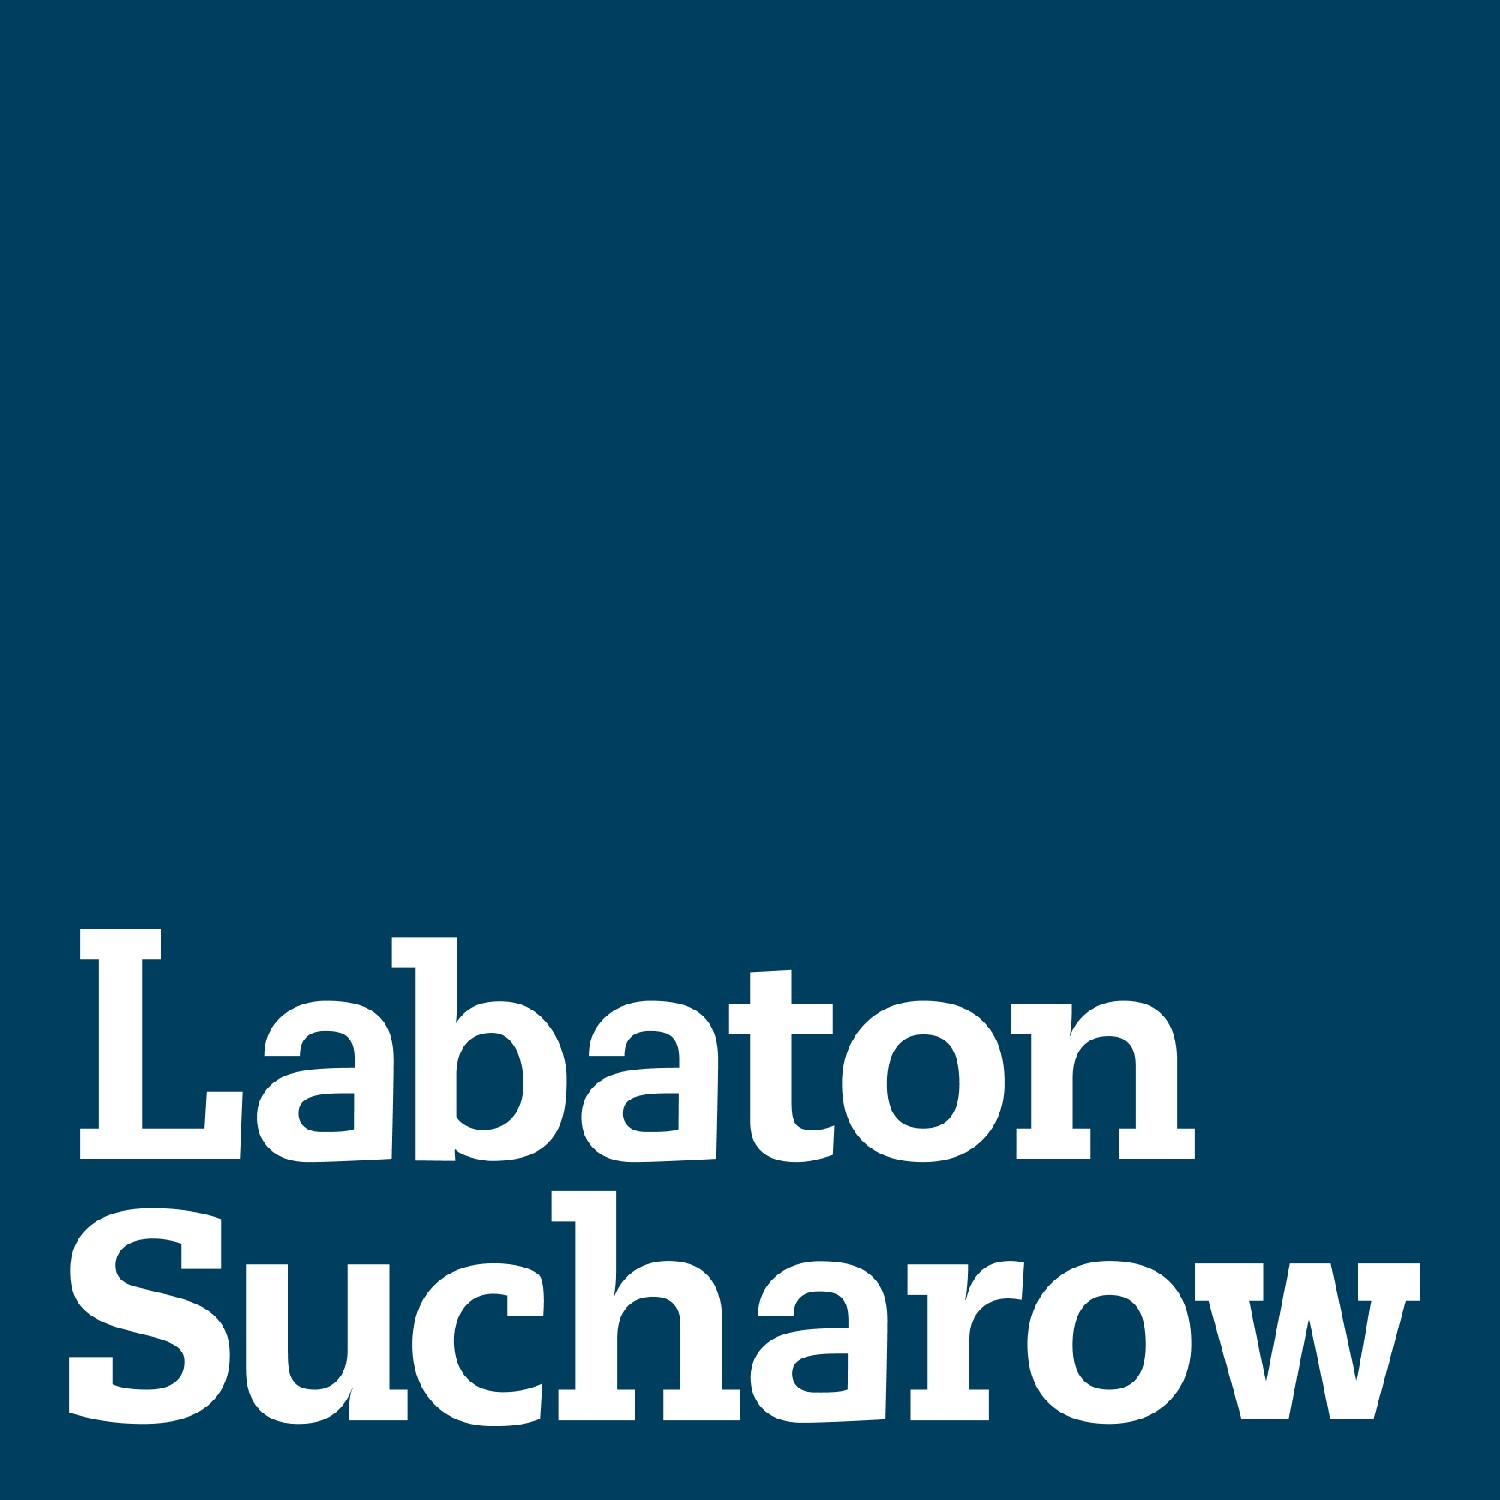 Labaton Sucharow LLP, Friday, April 30, 2021, Press release picture